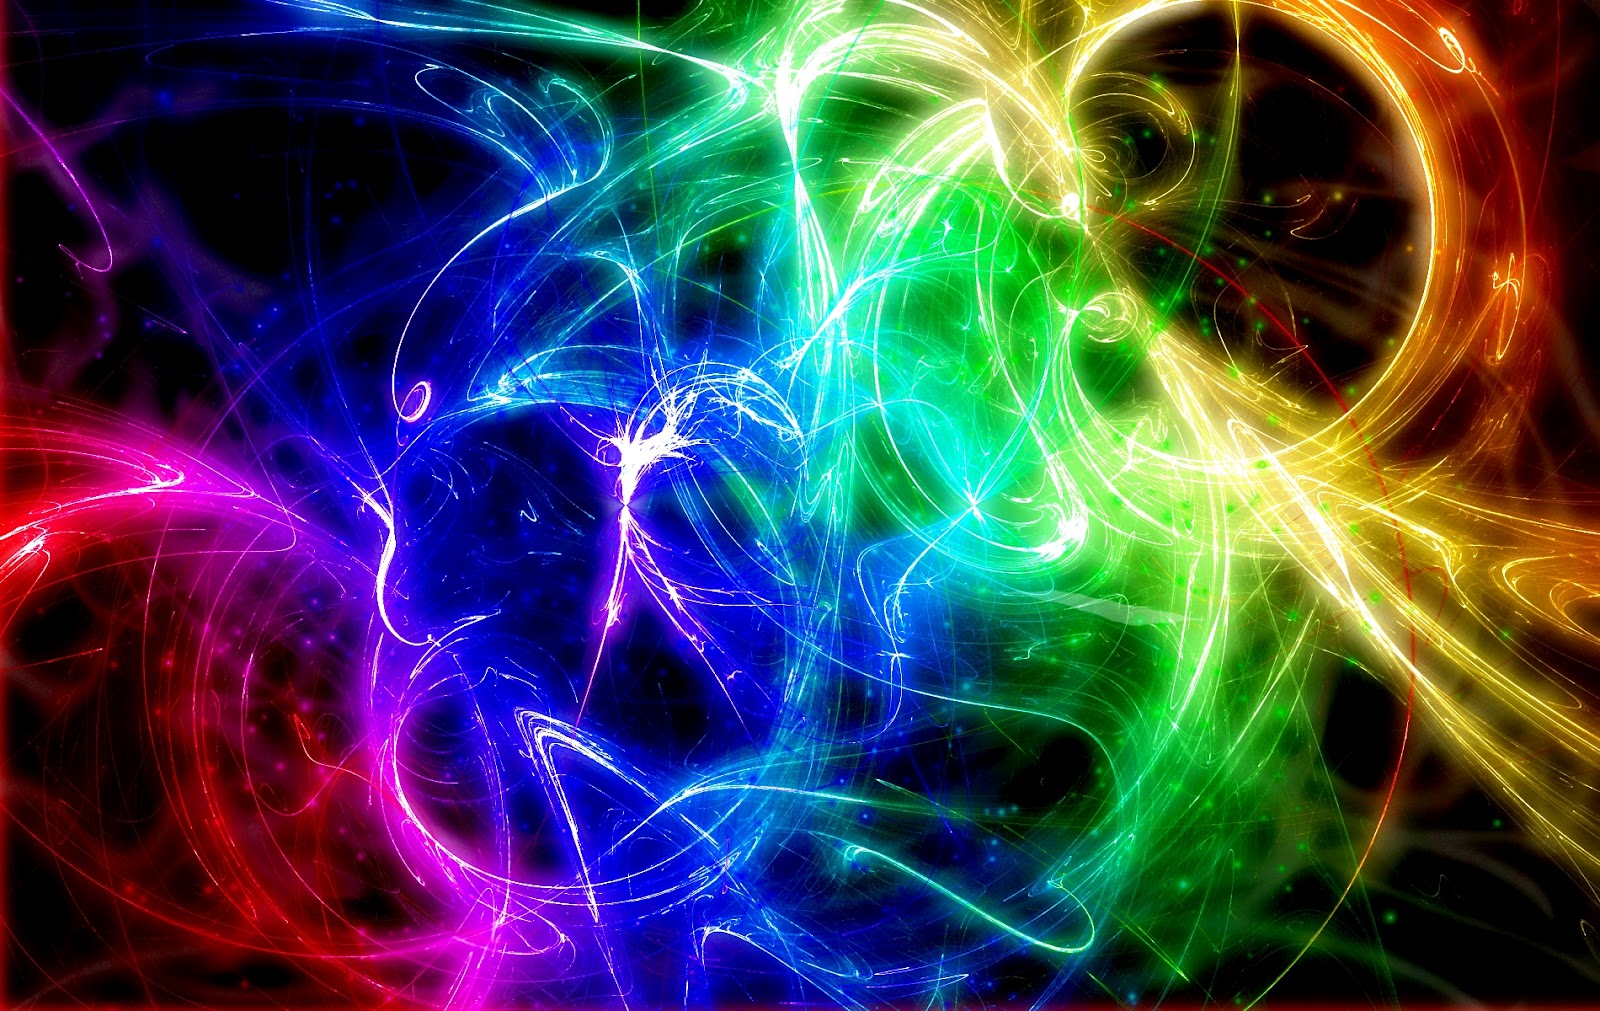  Abstract Light  HD Wallpapers High Definition Free 